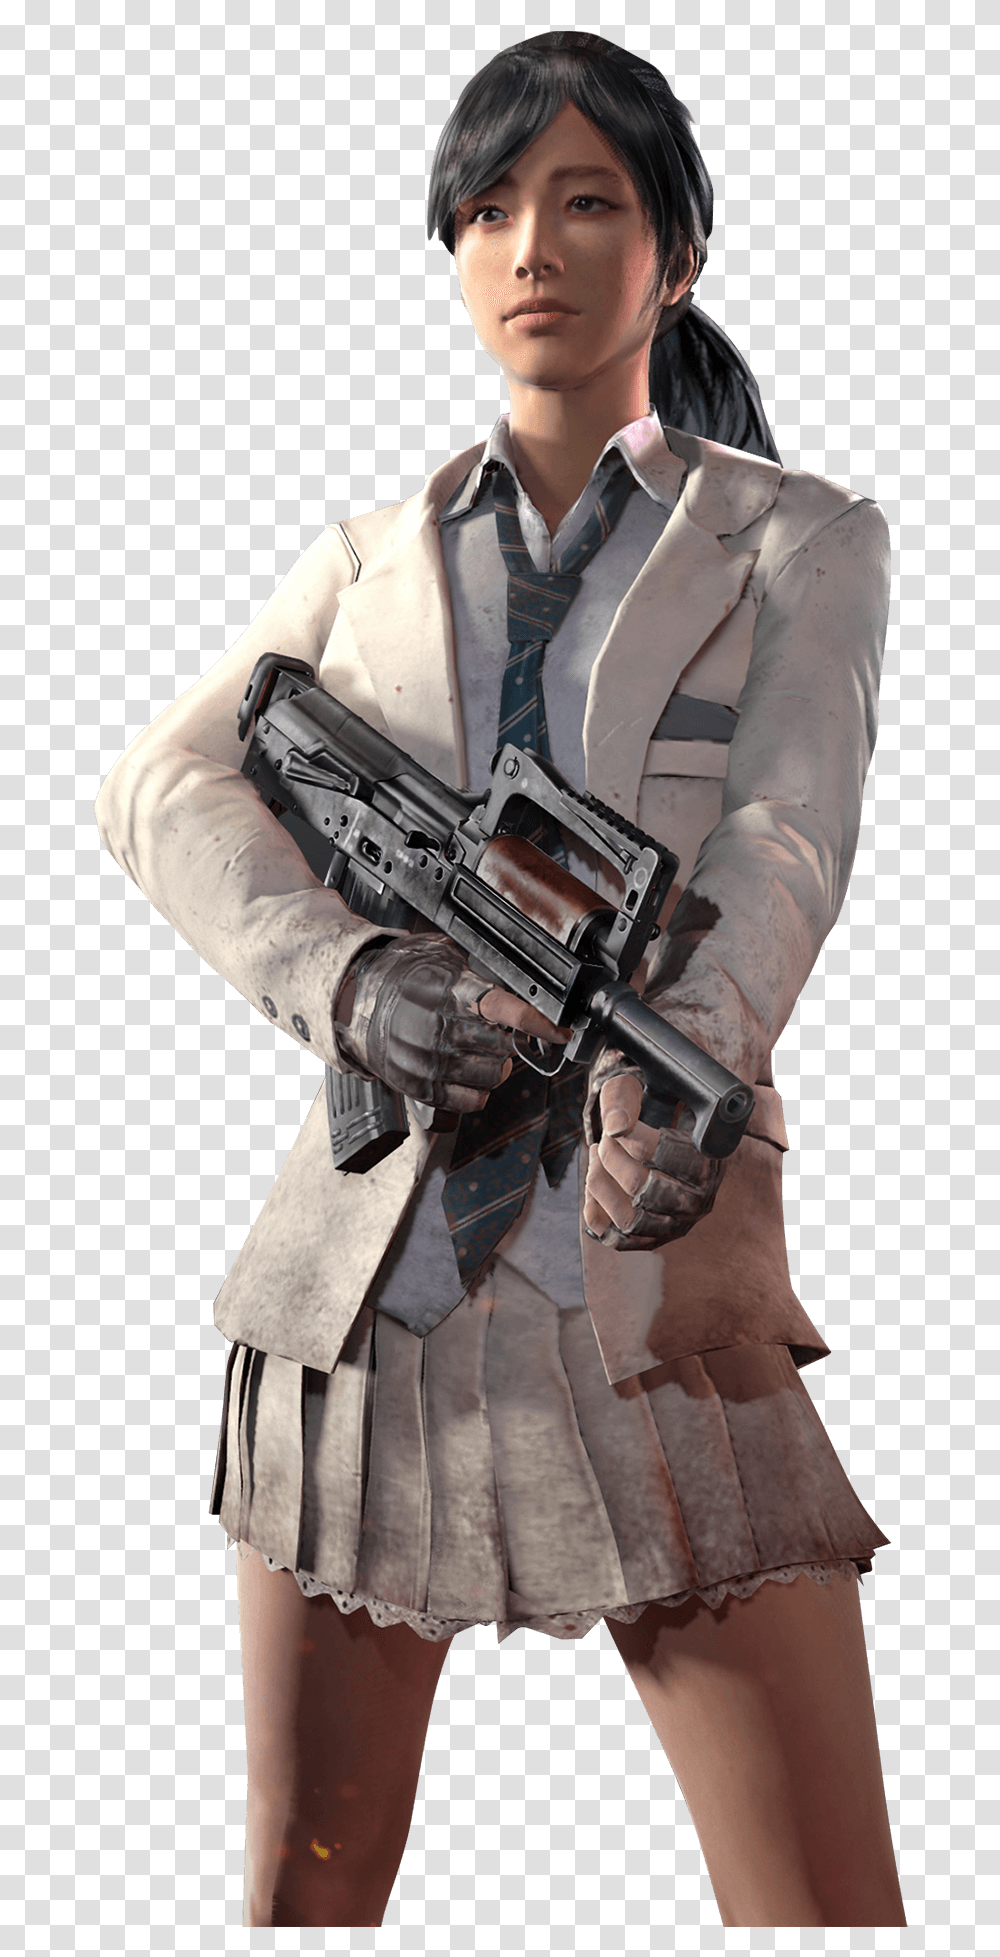 Pubg Player Battlegrounds Image Free Searchpng Pubg Character, Gun, Weapon, Weaponry, Person Transparent Png